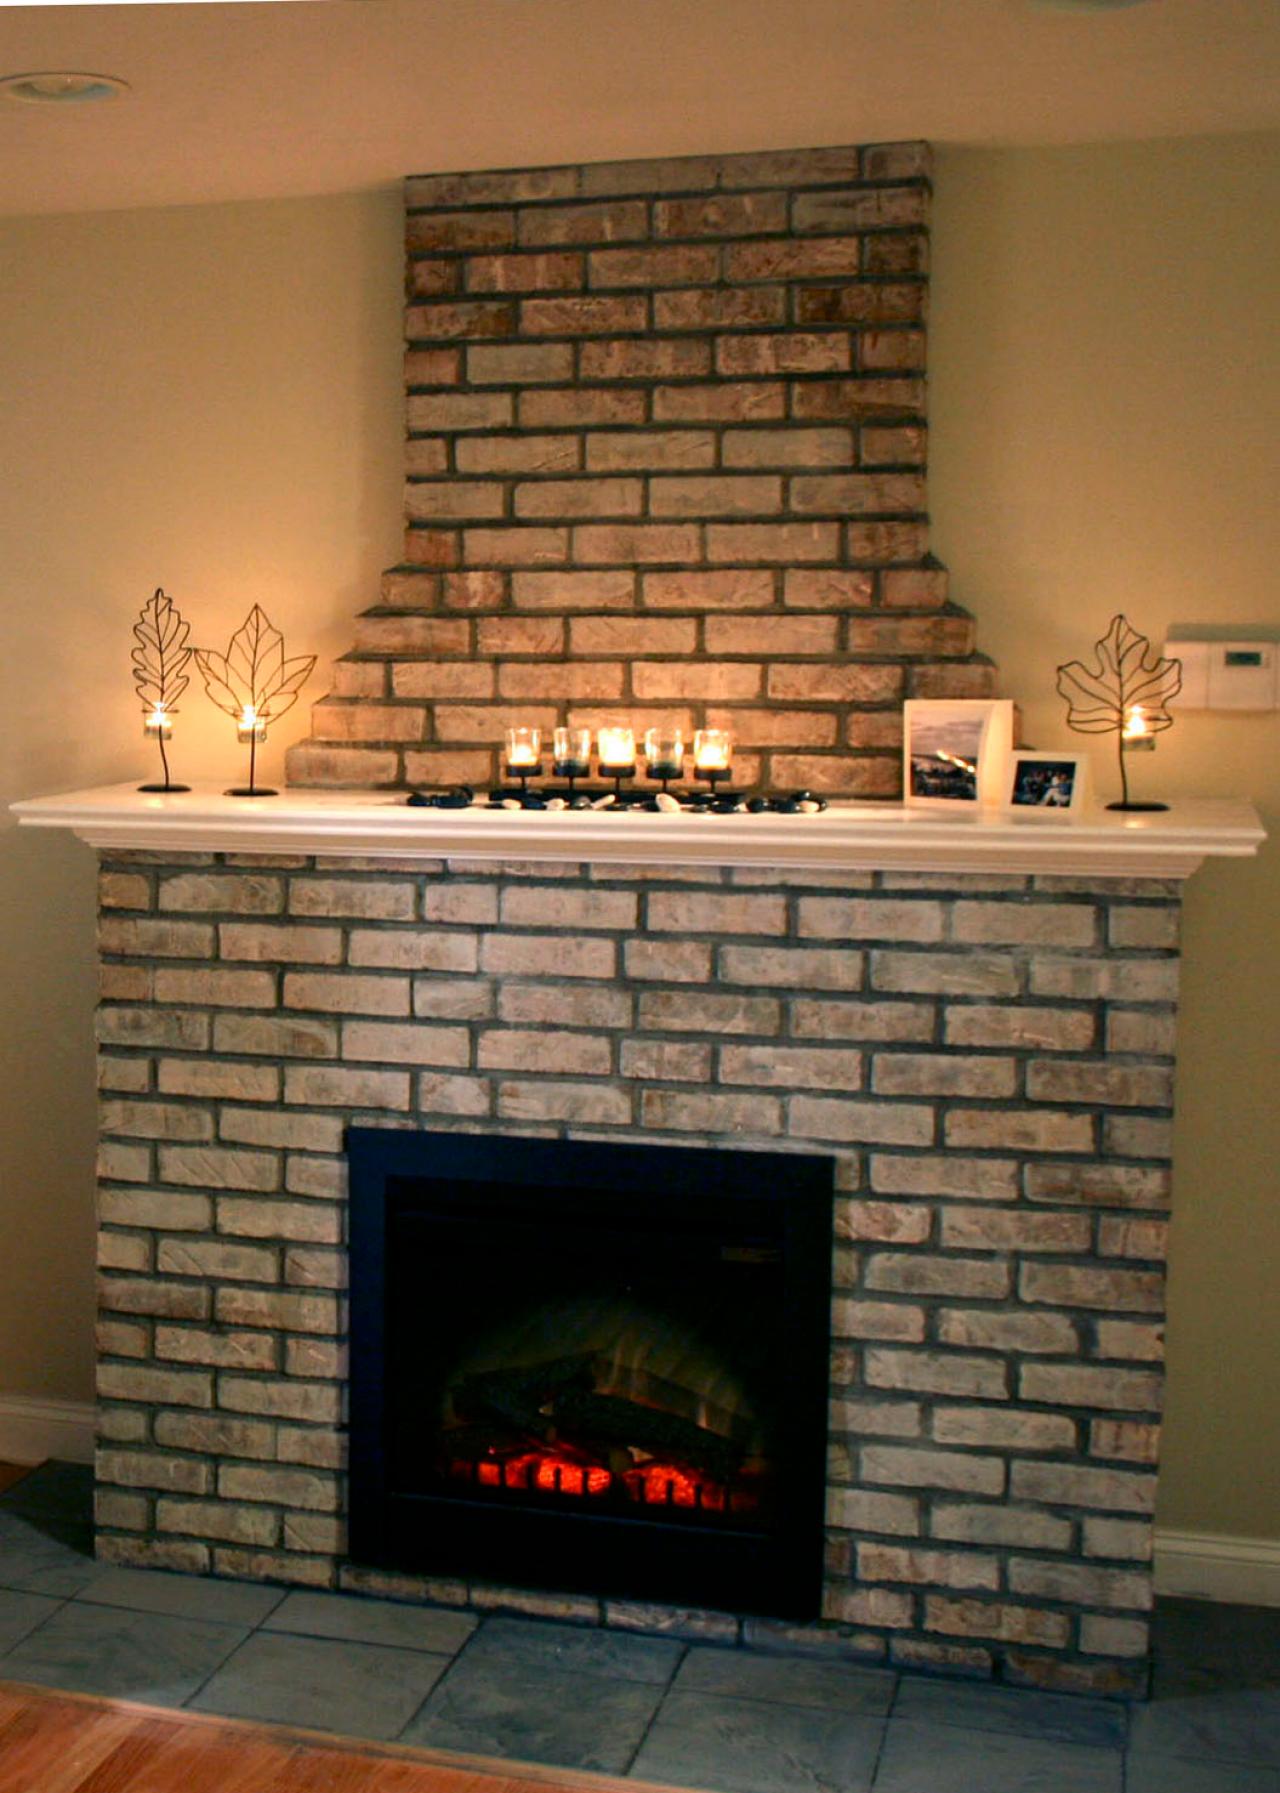 Electric Fireplace With Brick Facade, How To Install Stone Around Electric Fireplace